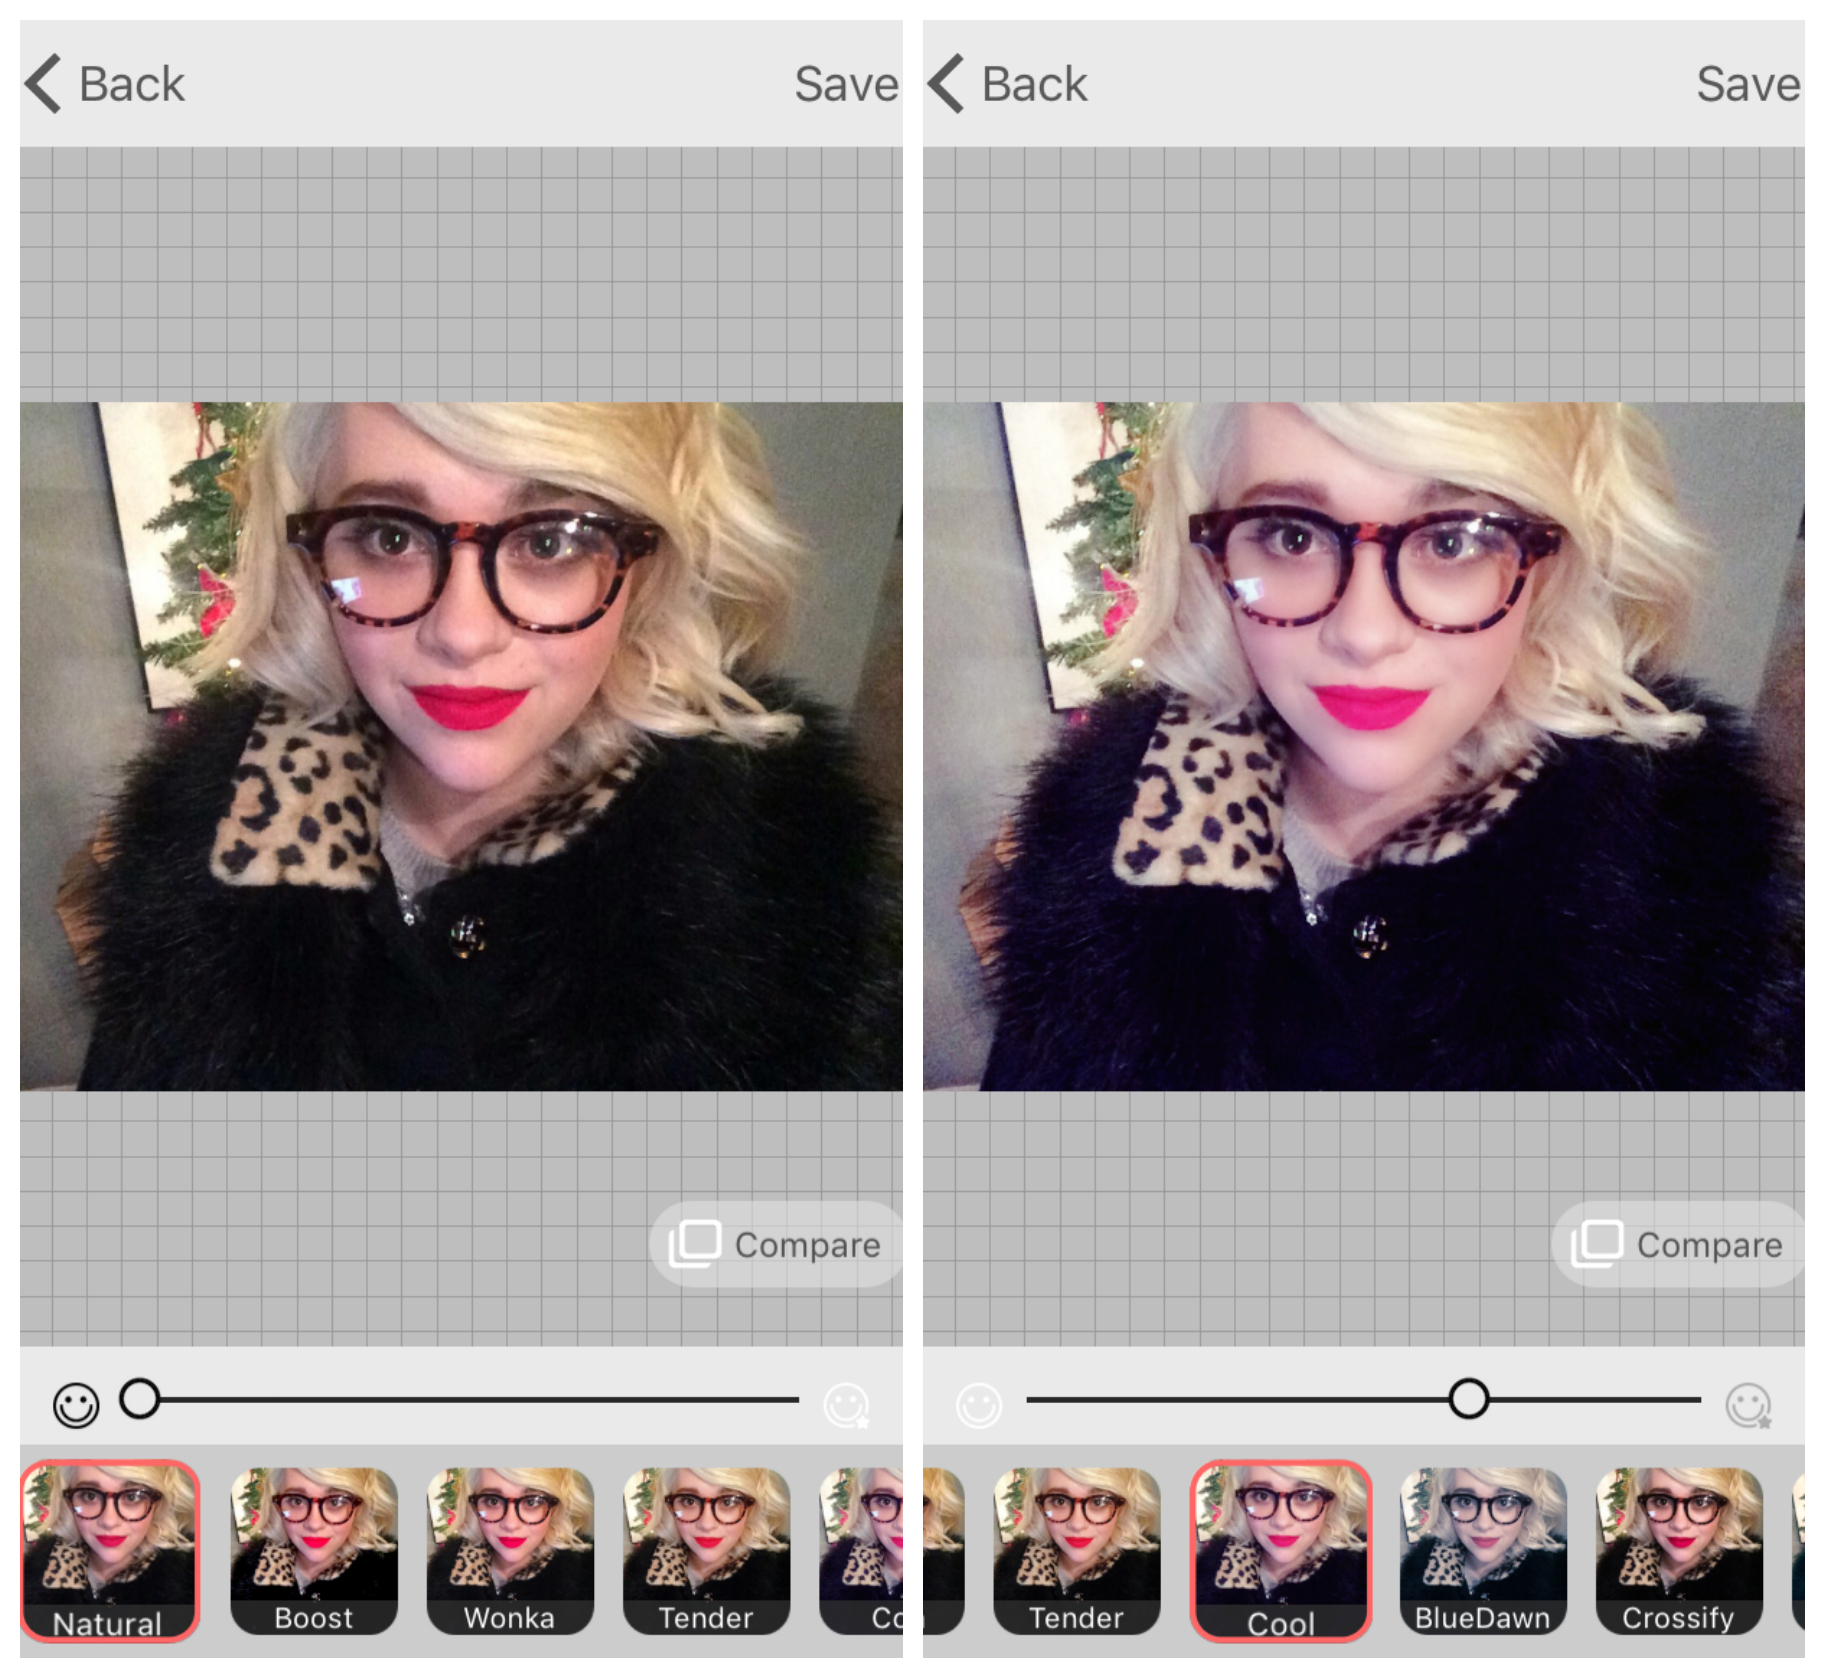 Unedited (left), Microsoft Selfie's 'Cool' filter (right). 